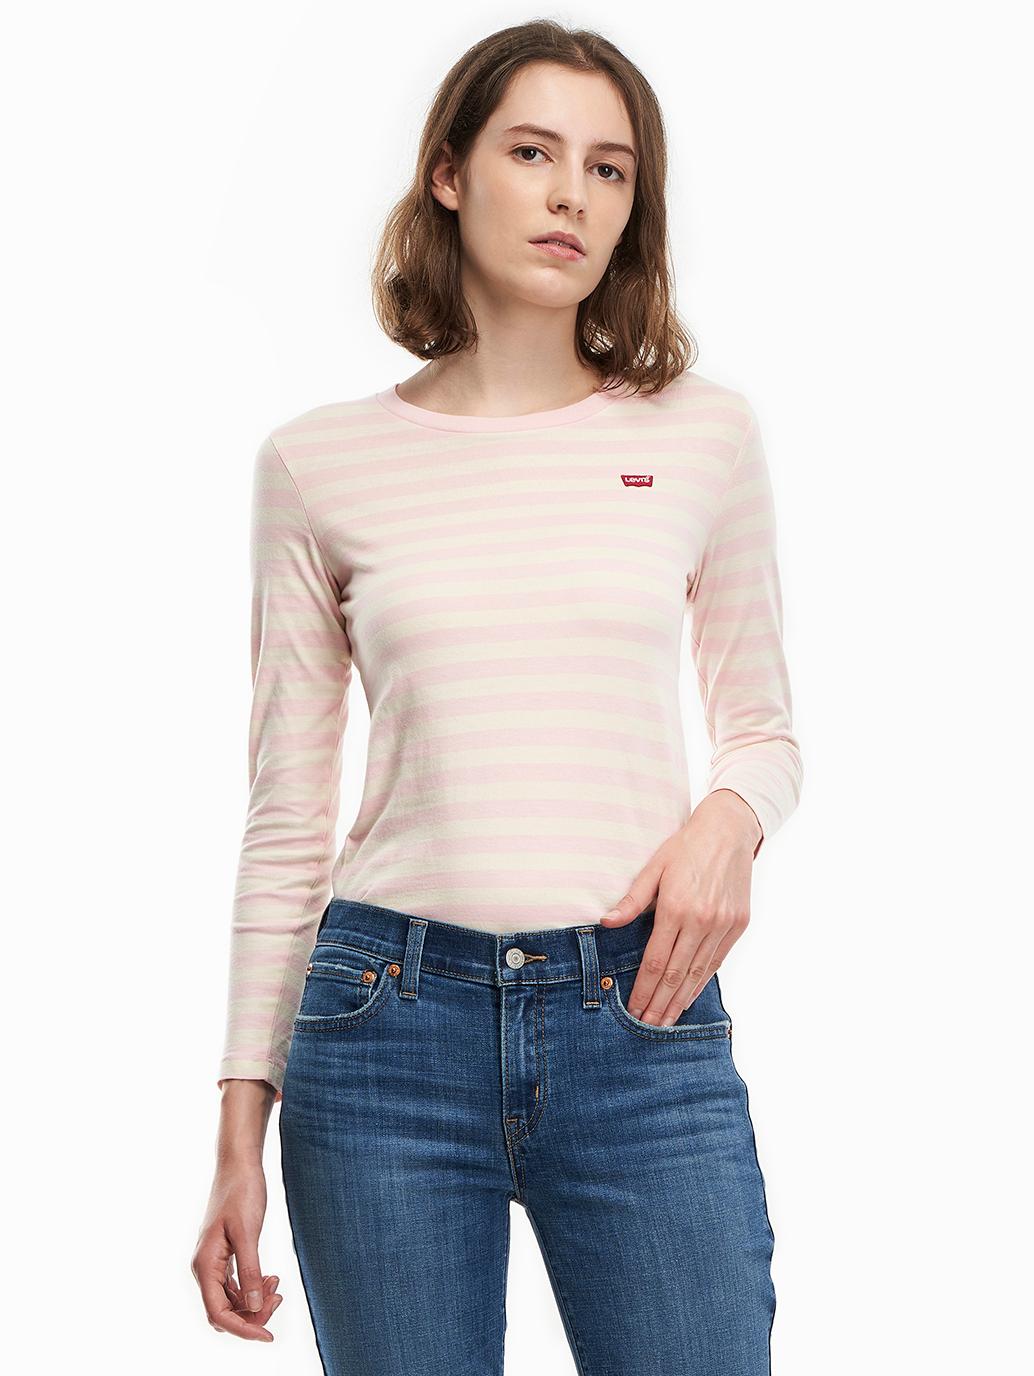 levis malaysia womens long sleeve perfect tee A15620000 10 Model Front